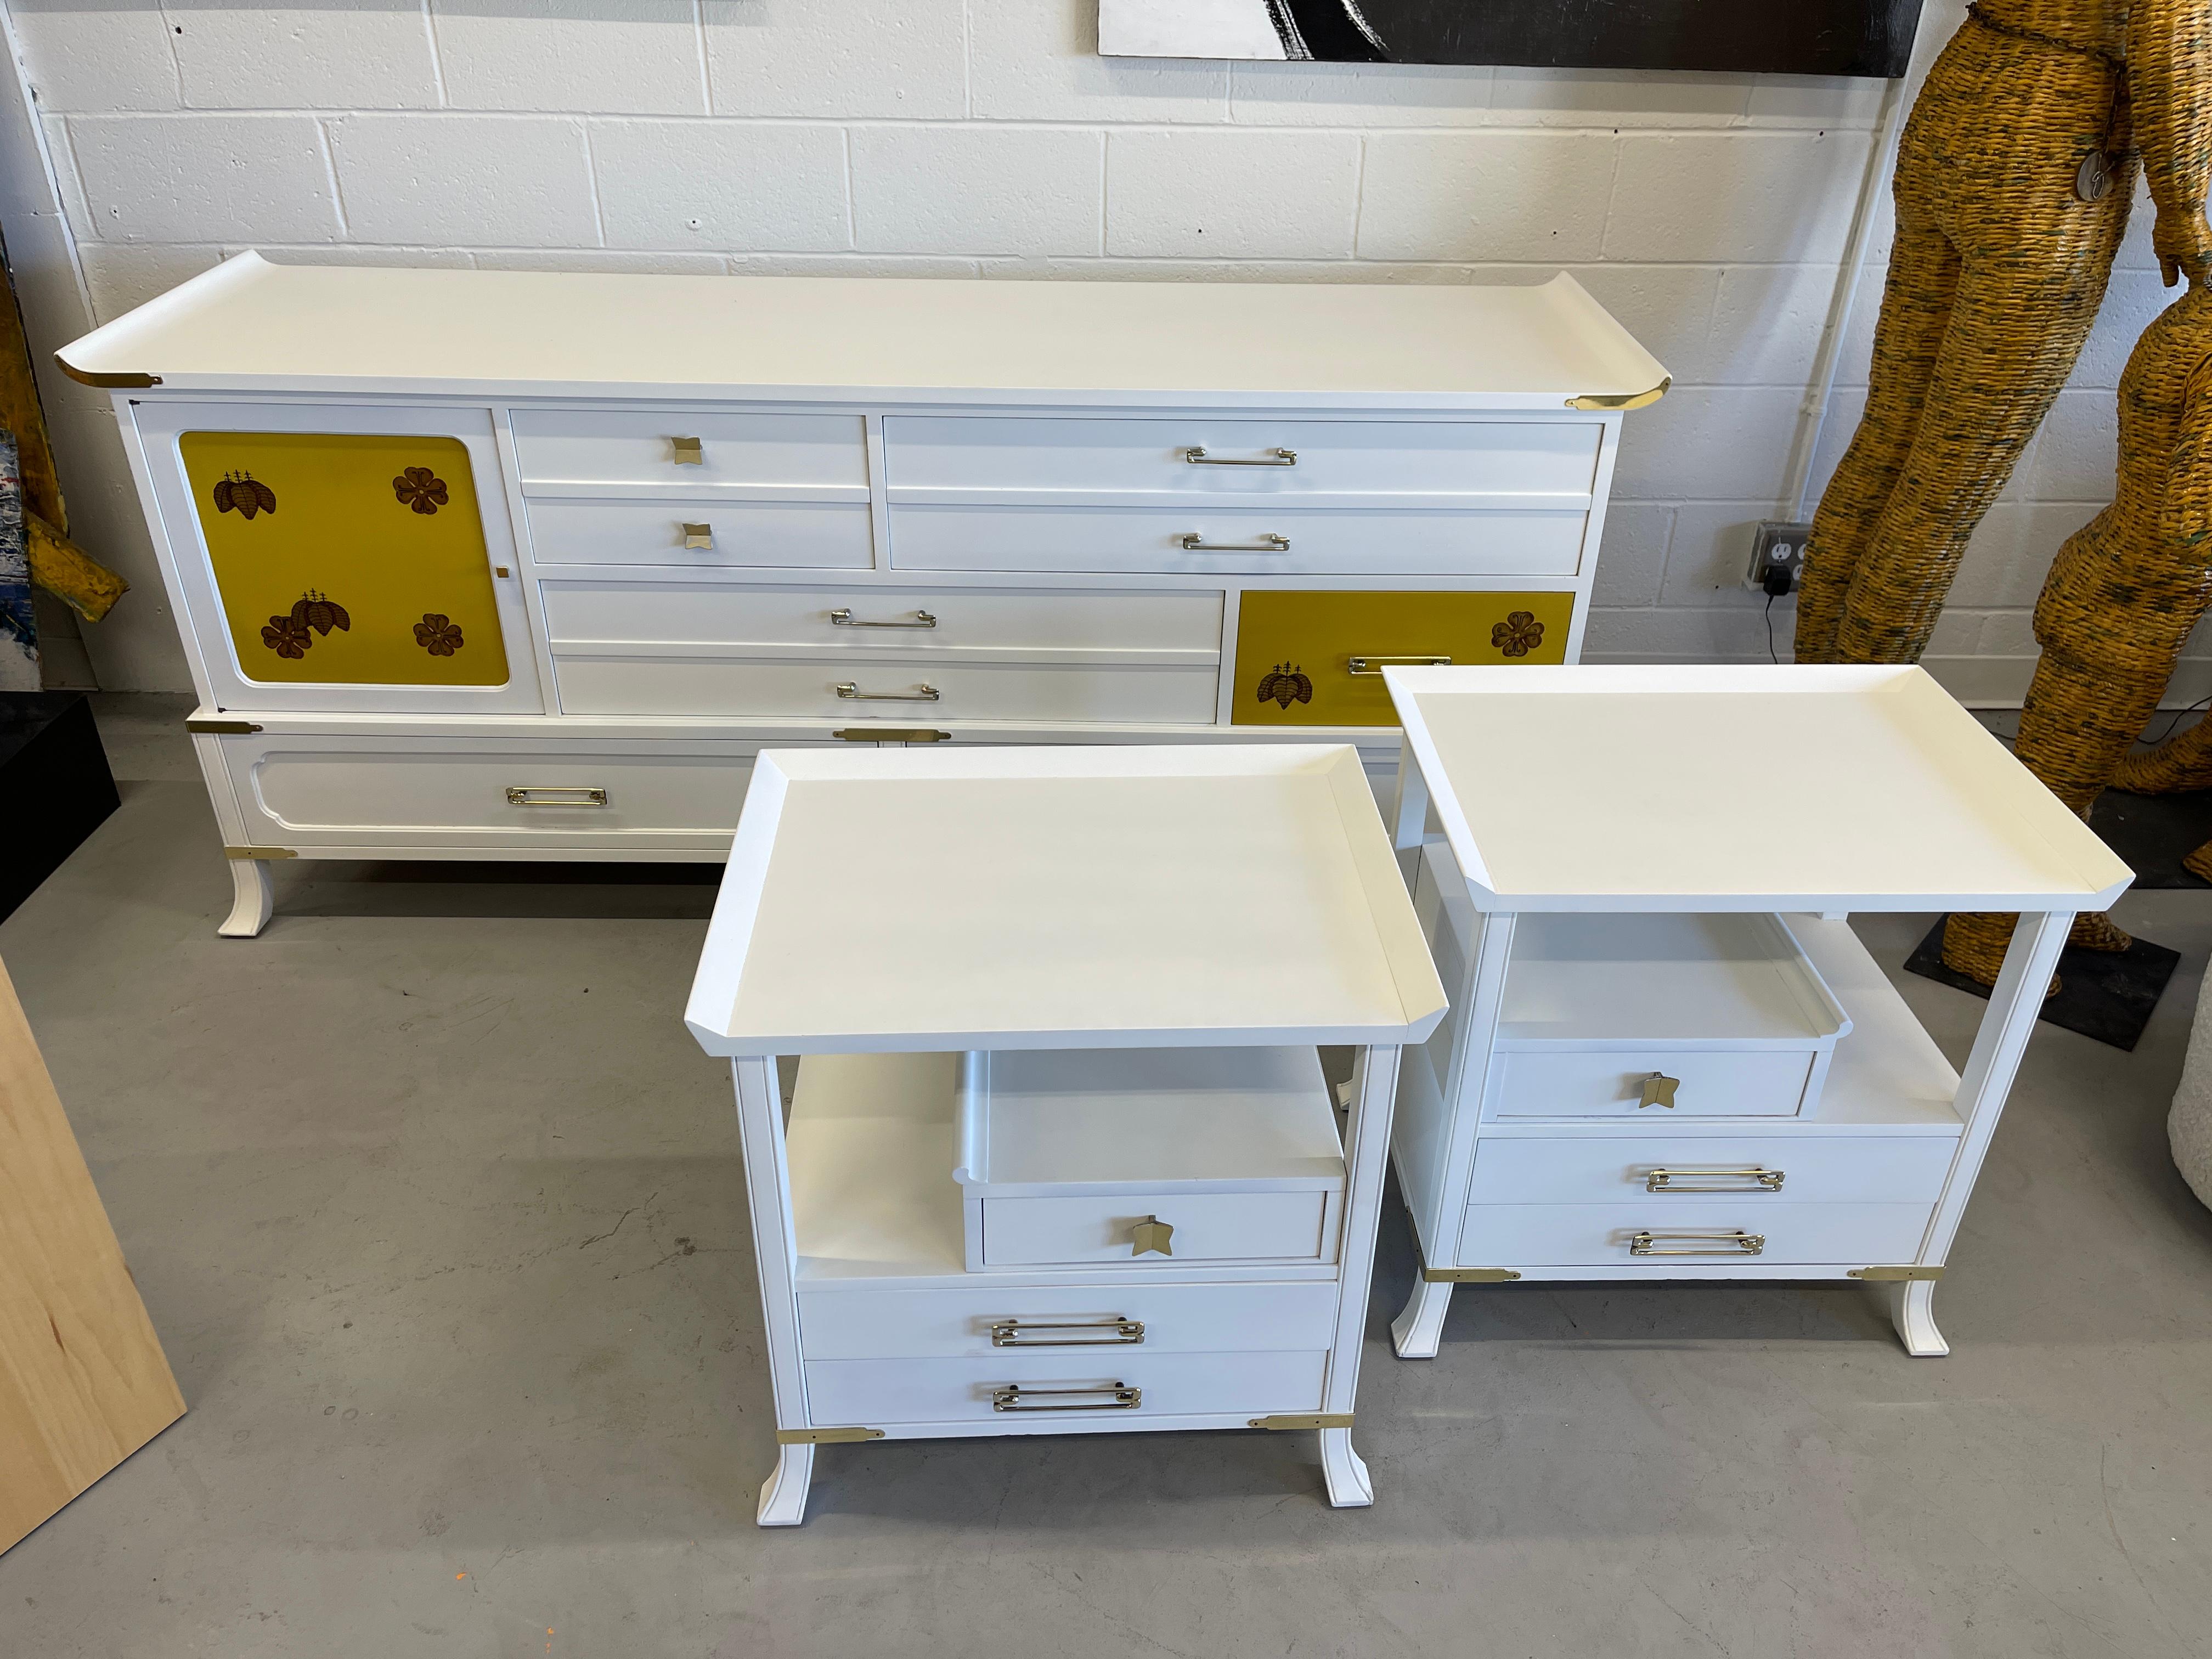 Beautiful Grosfeld House 3 piece painted bedroom set with brass accents. Elegant Hollywood Regency styling. Lovely yellow painted original doors on the long dresser. We’ve had the set repainted a nice white. Hardware has been polished. Each of the